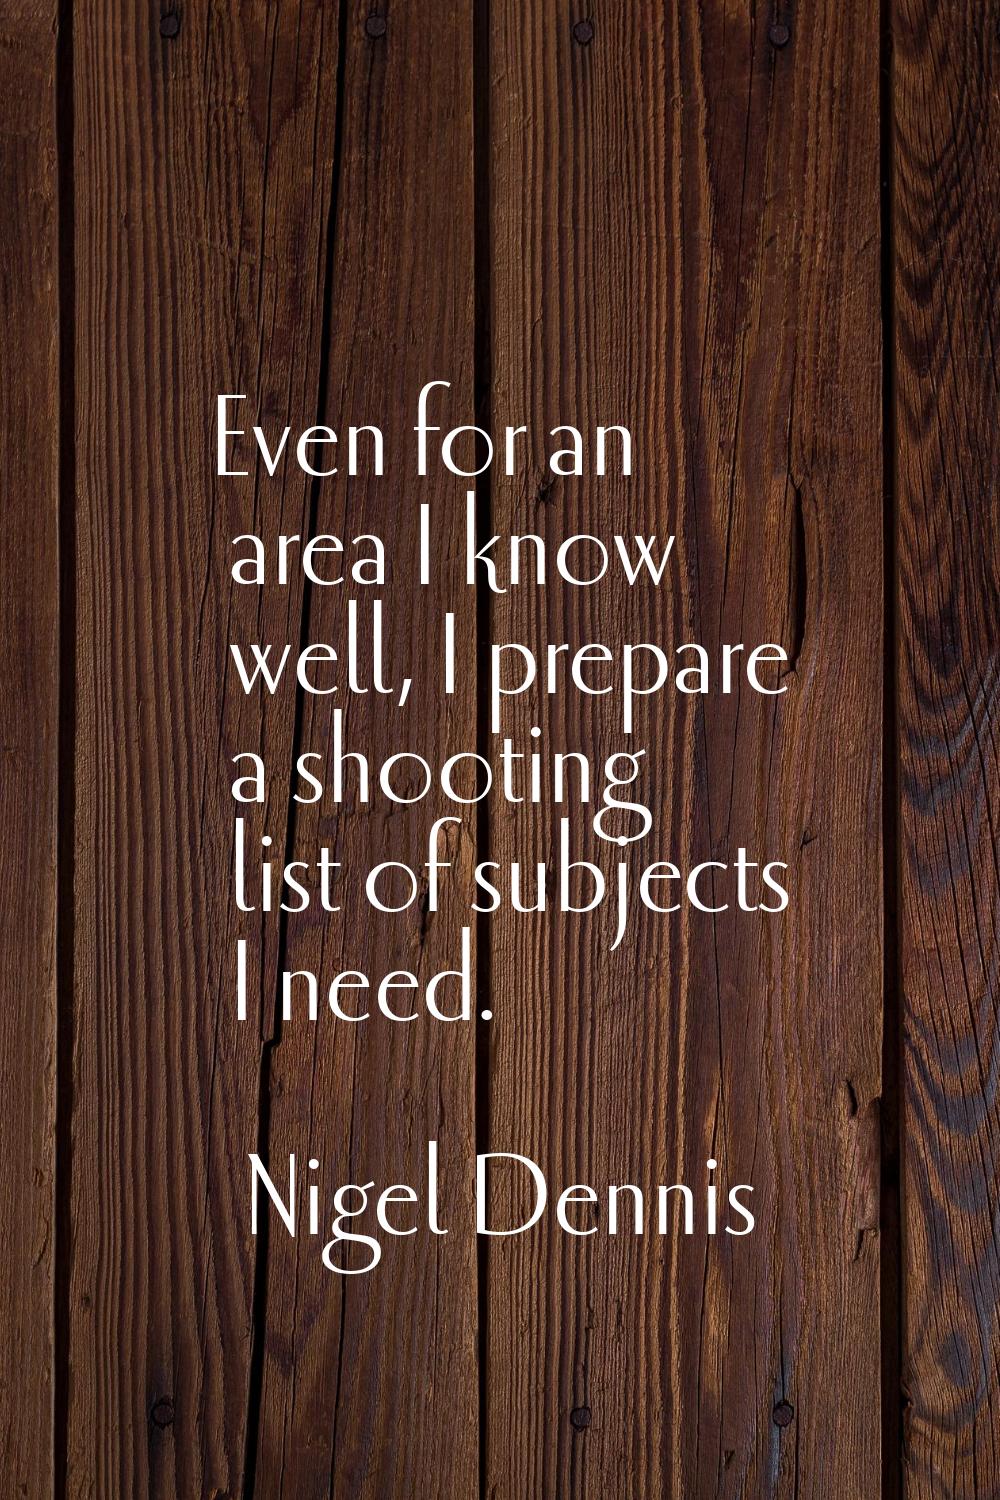 Even for an area I know well, I prepare a shooting list of subjects I need.